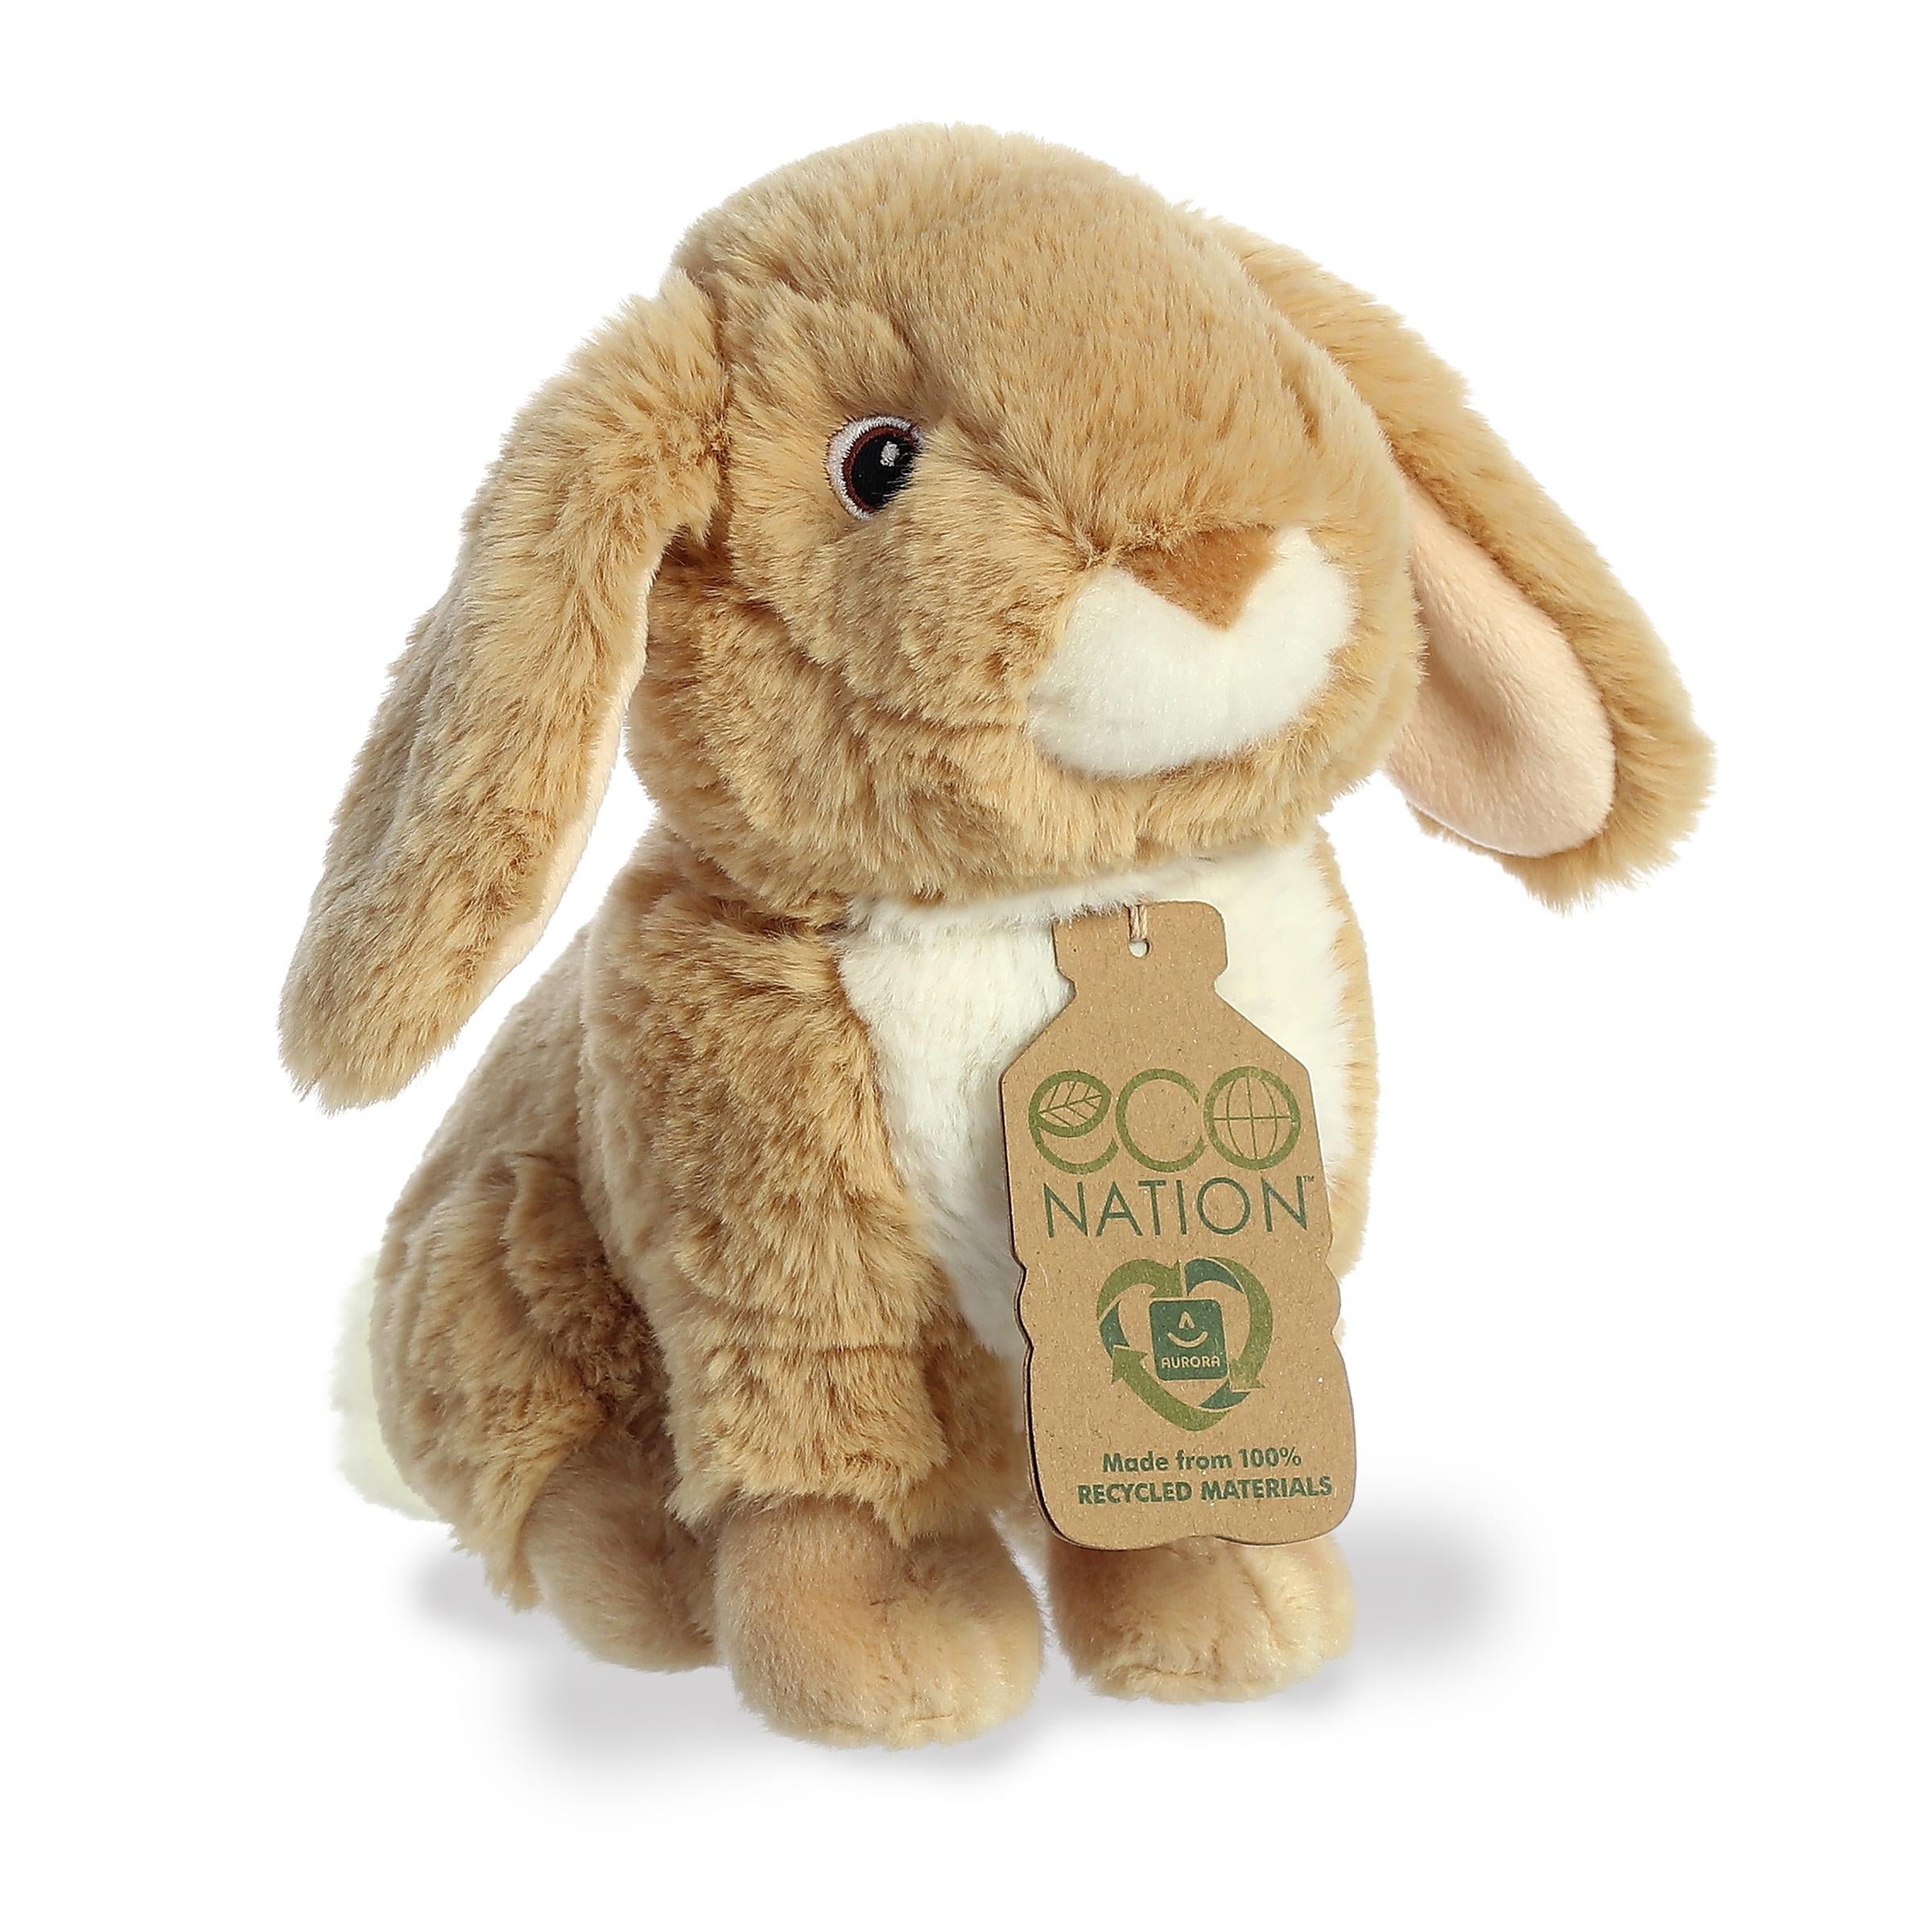 Lop Eared Rabbit plush from Aurora's Eco Nation stuffed animals, featuring realistic details and soft texture